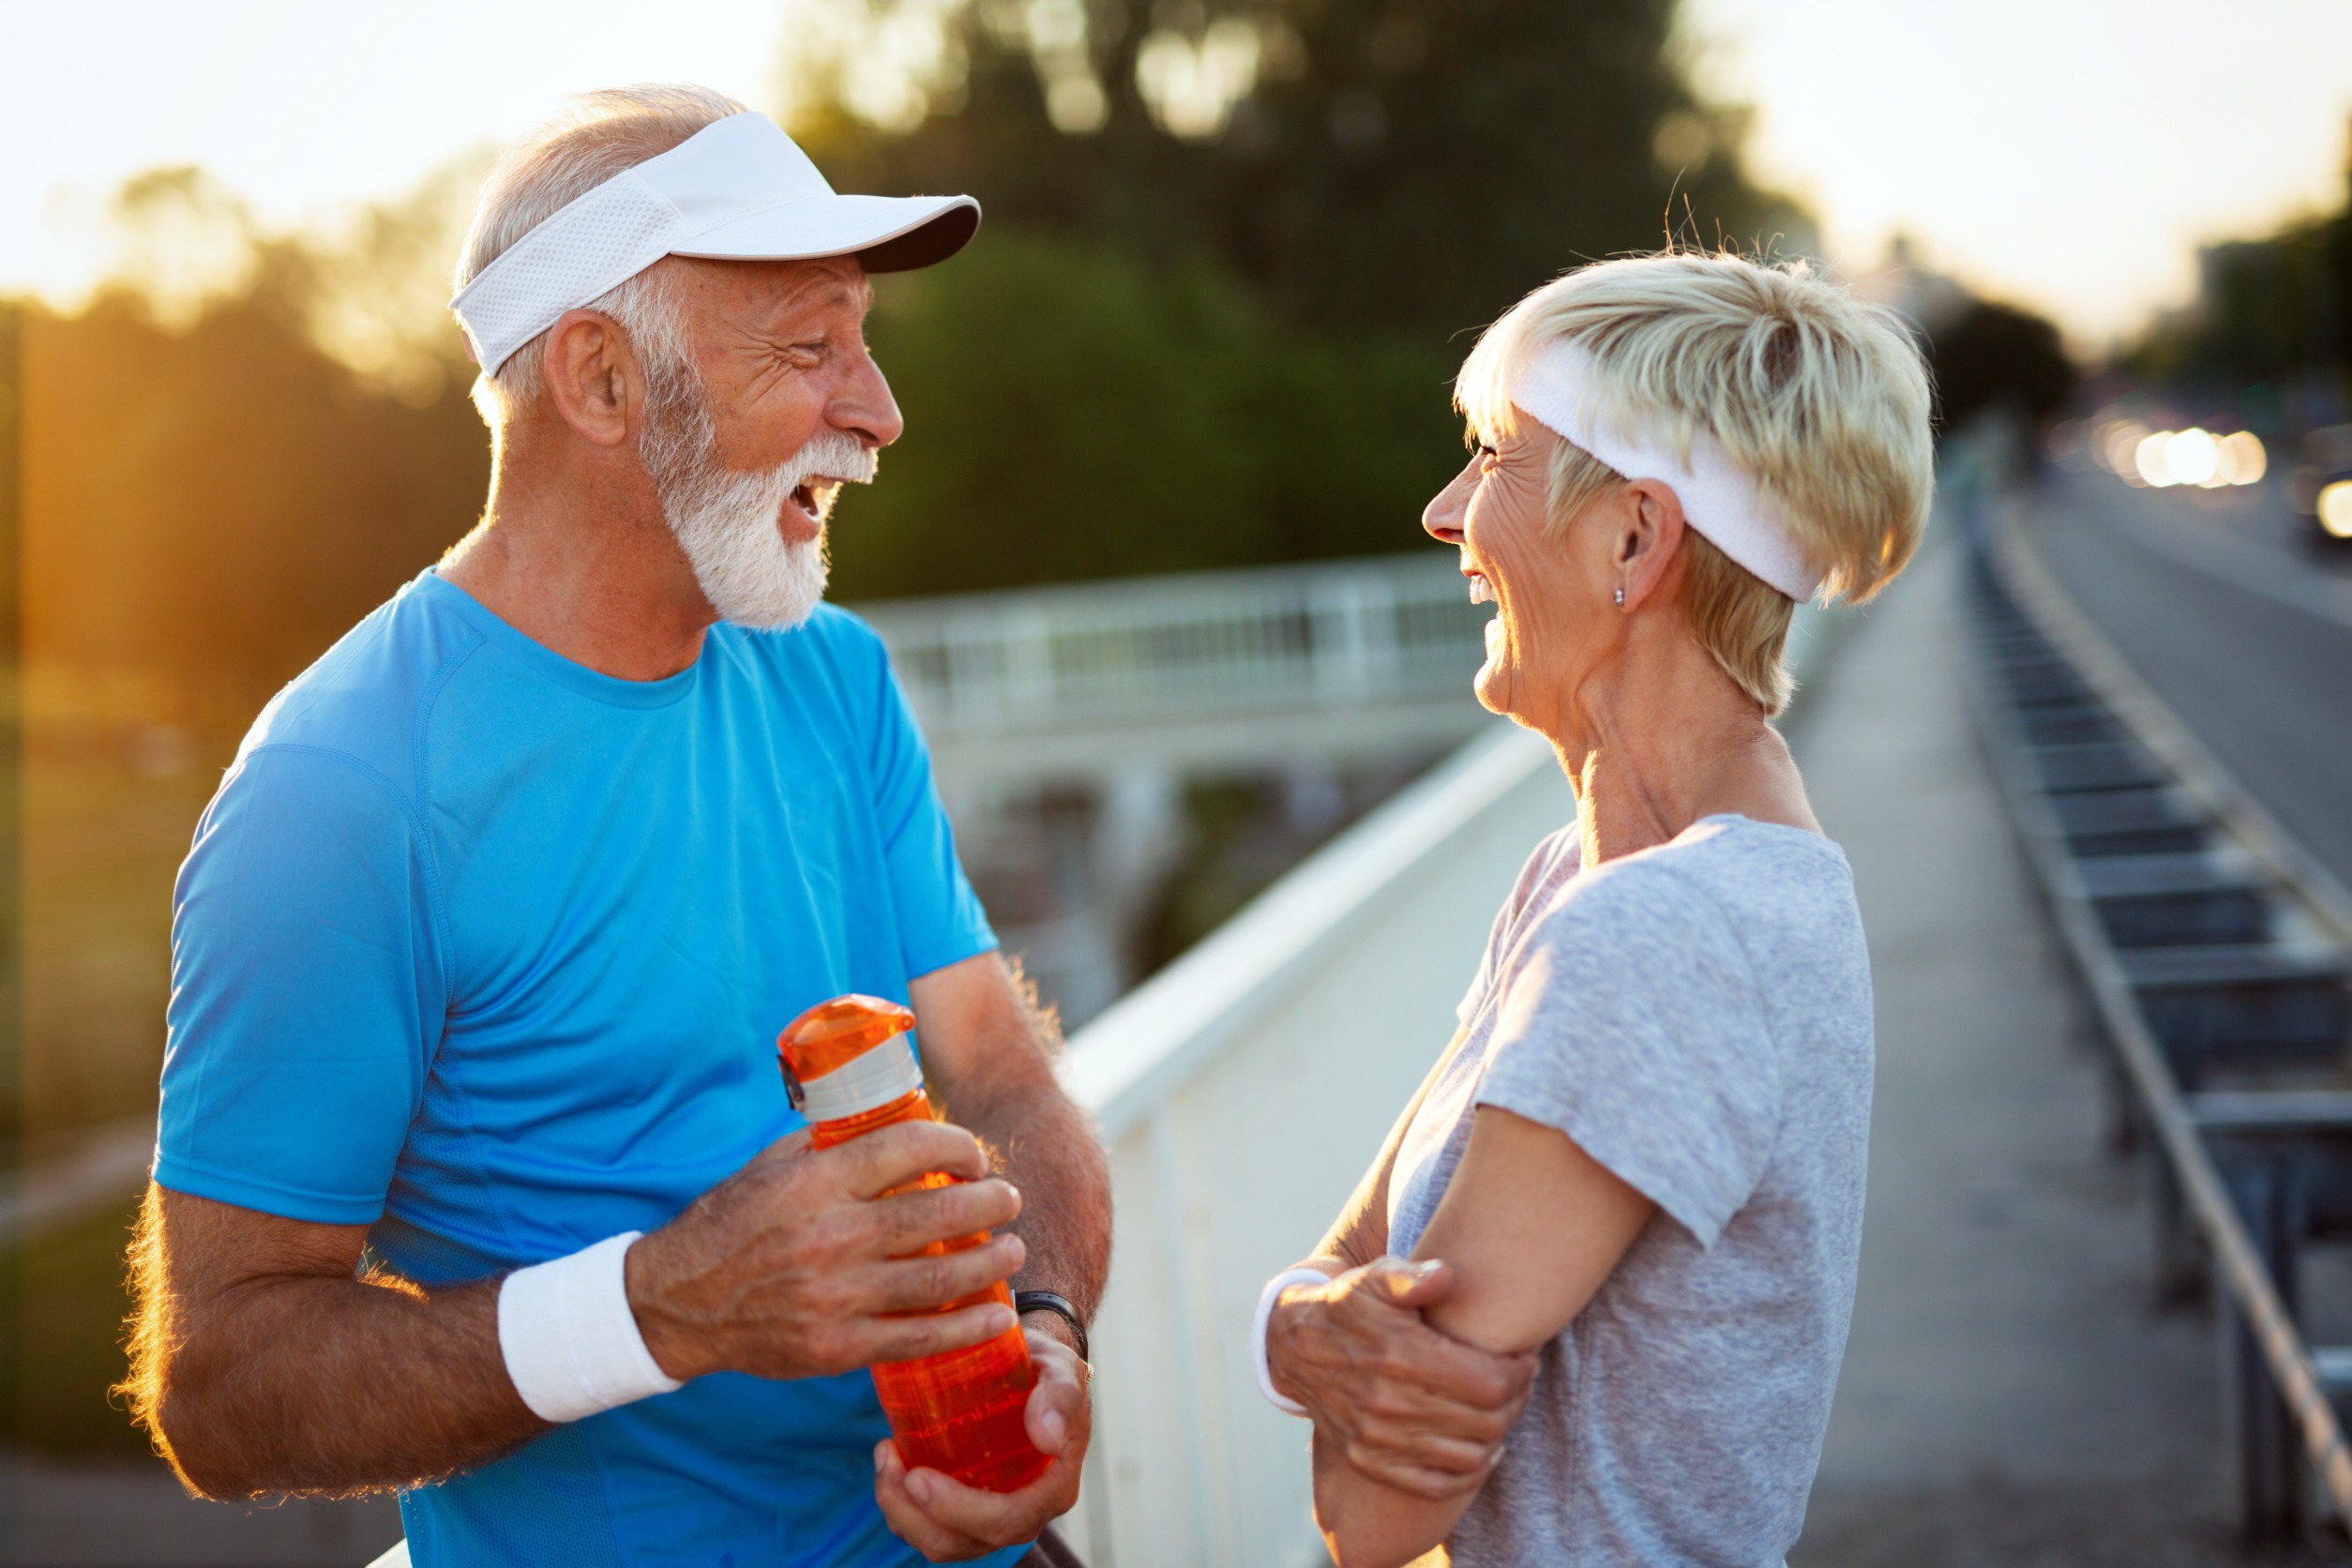 <p>Neglecting one’s health can lead to significant regret, especially when it affects quality of life in later years. Investing in your physical and mental health through regular exercise, a balanced diet, and mindfulness practices can enhance your well-being and longevity.</p>